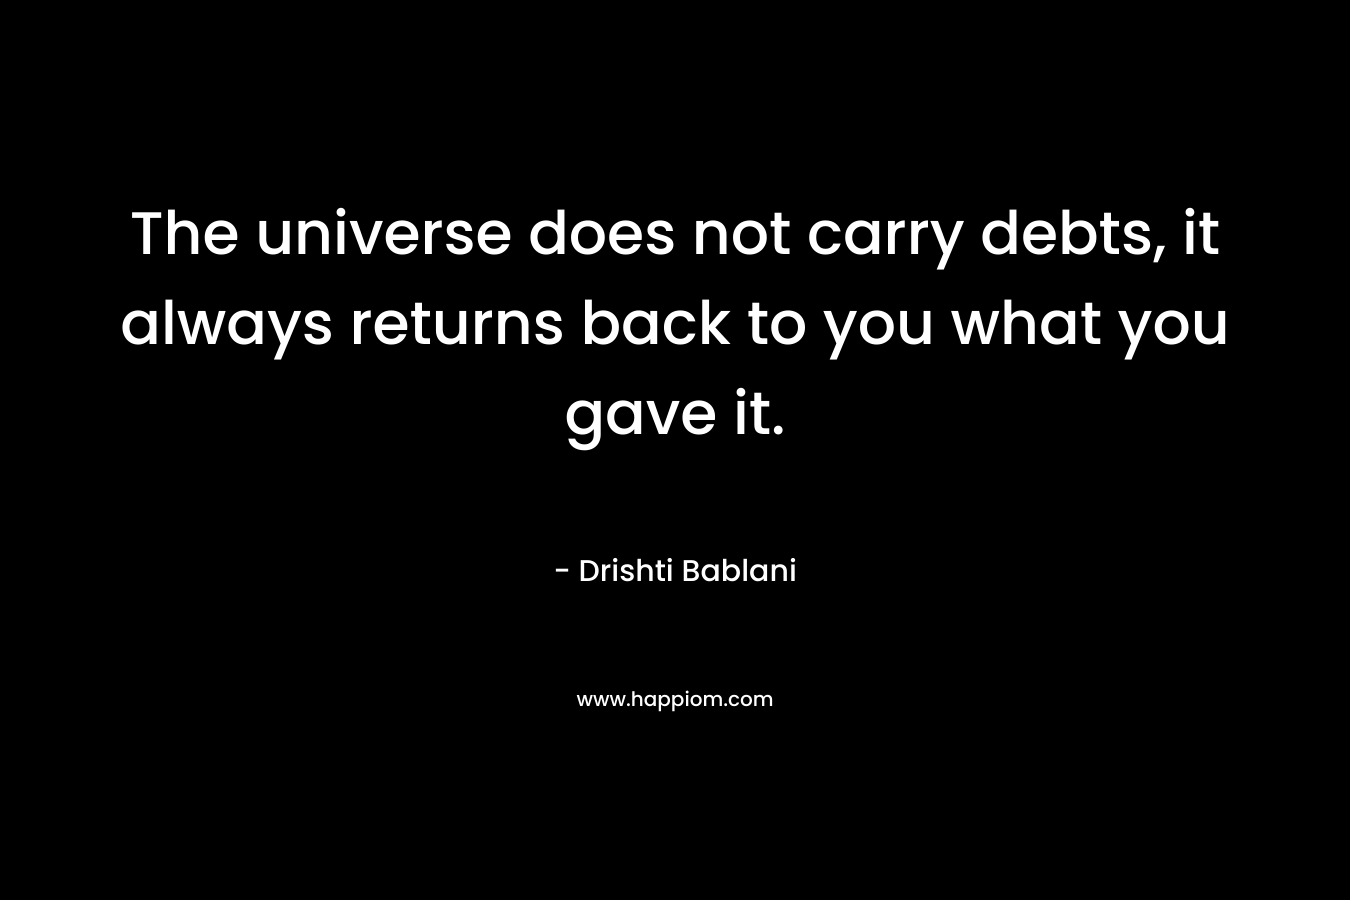 The universe does not carry debts, it always  returns back to you what you gave it.